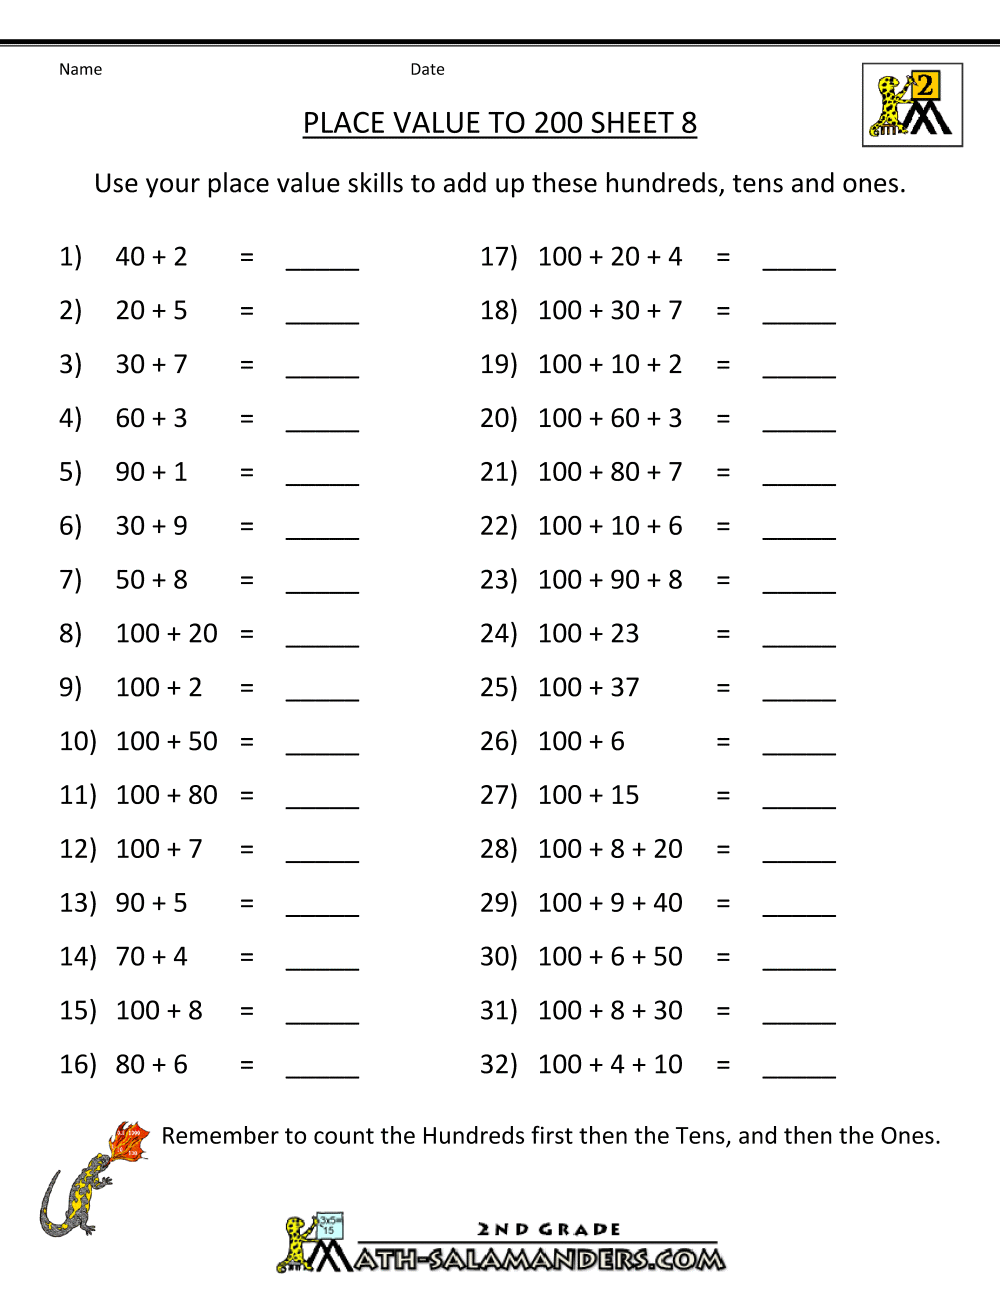 place-value-worksheet-numbers-to-200